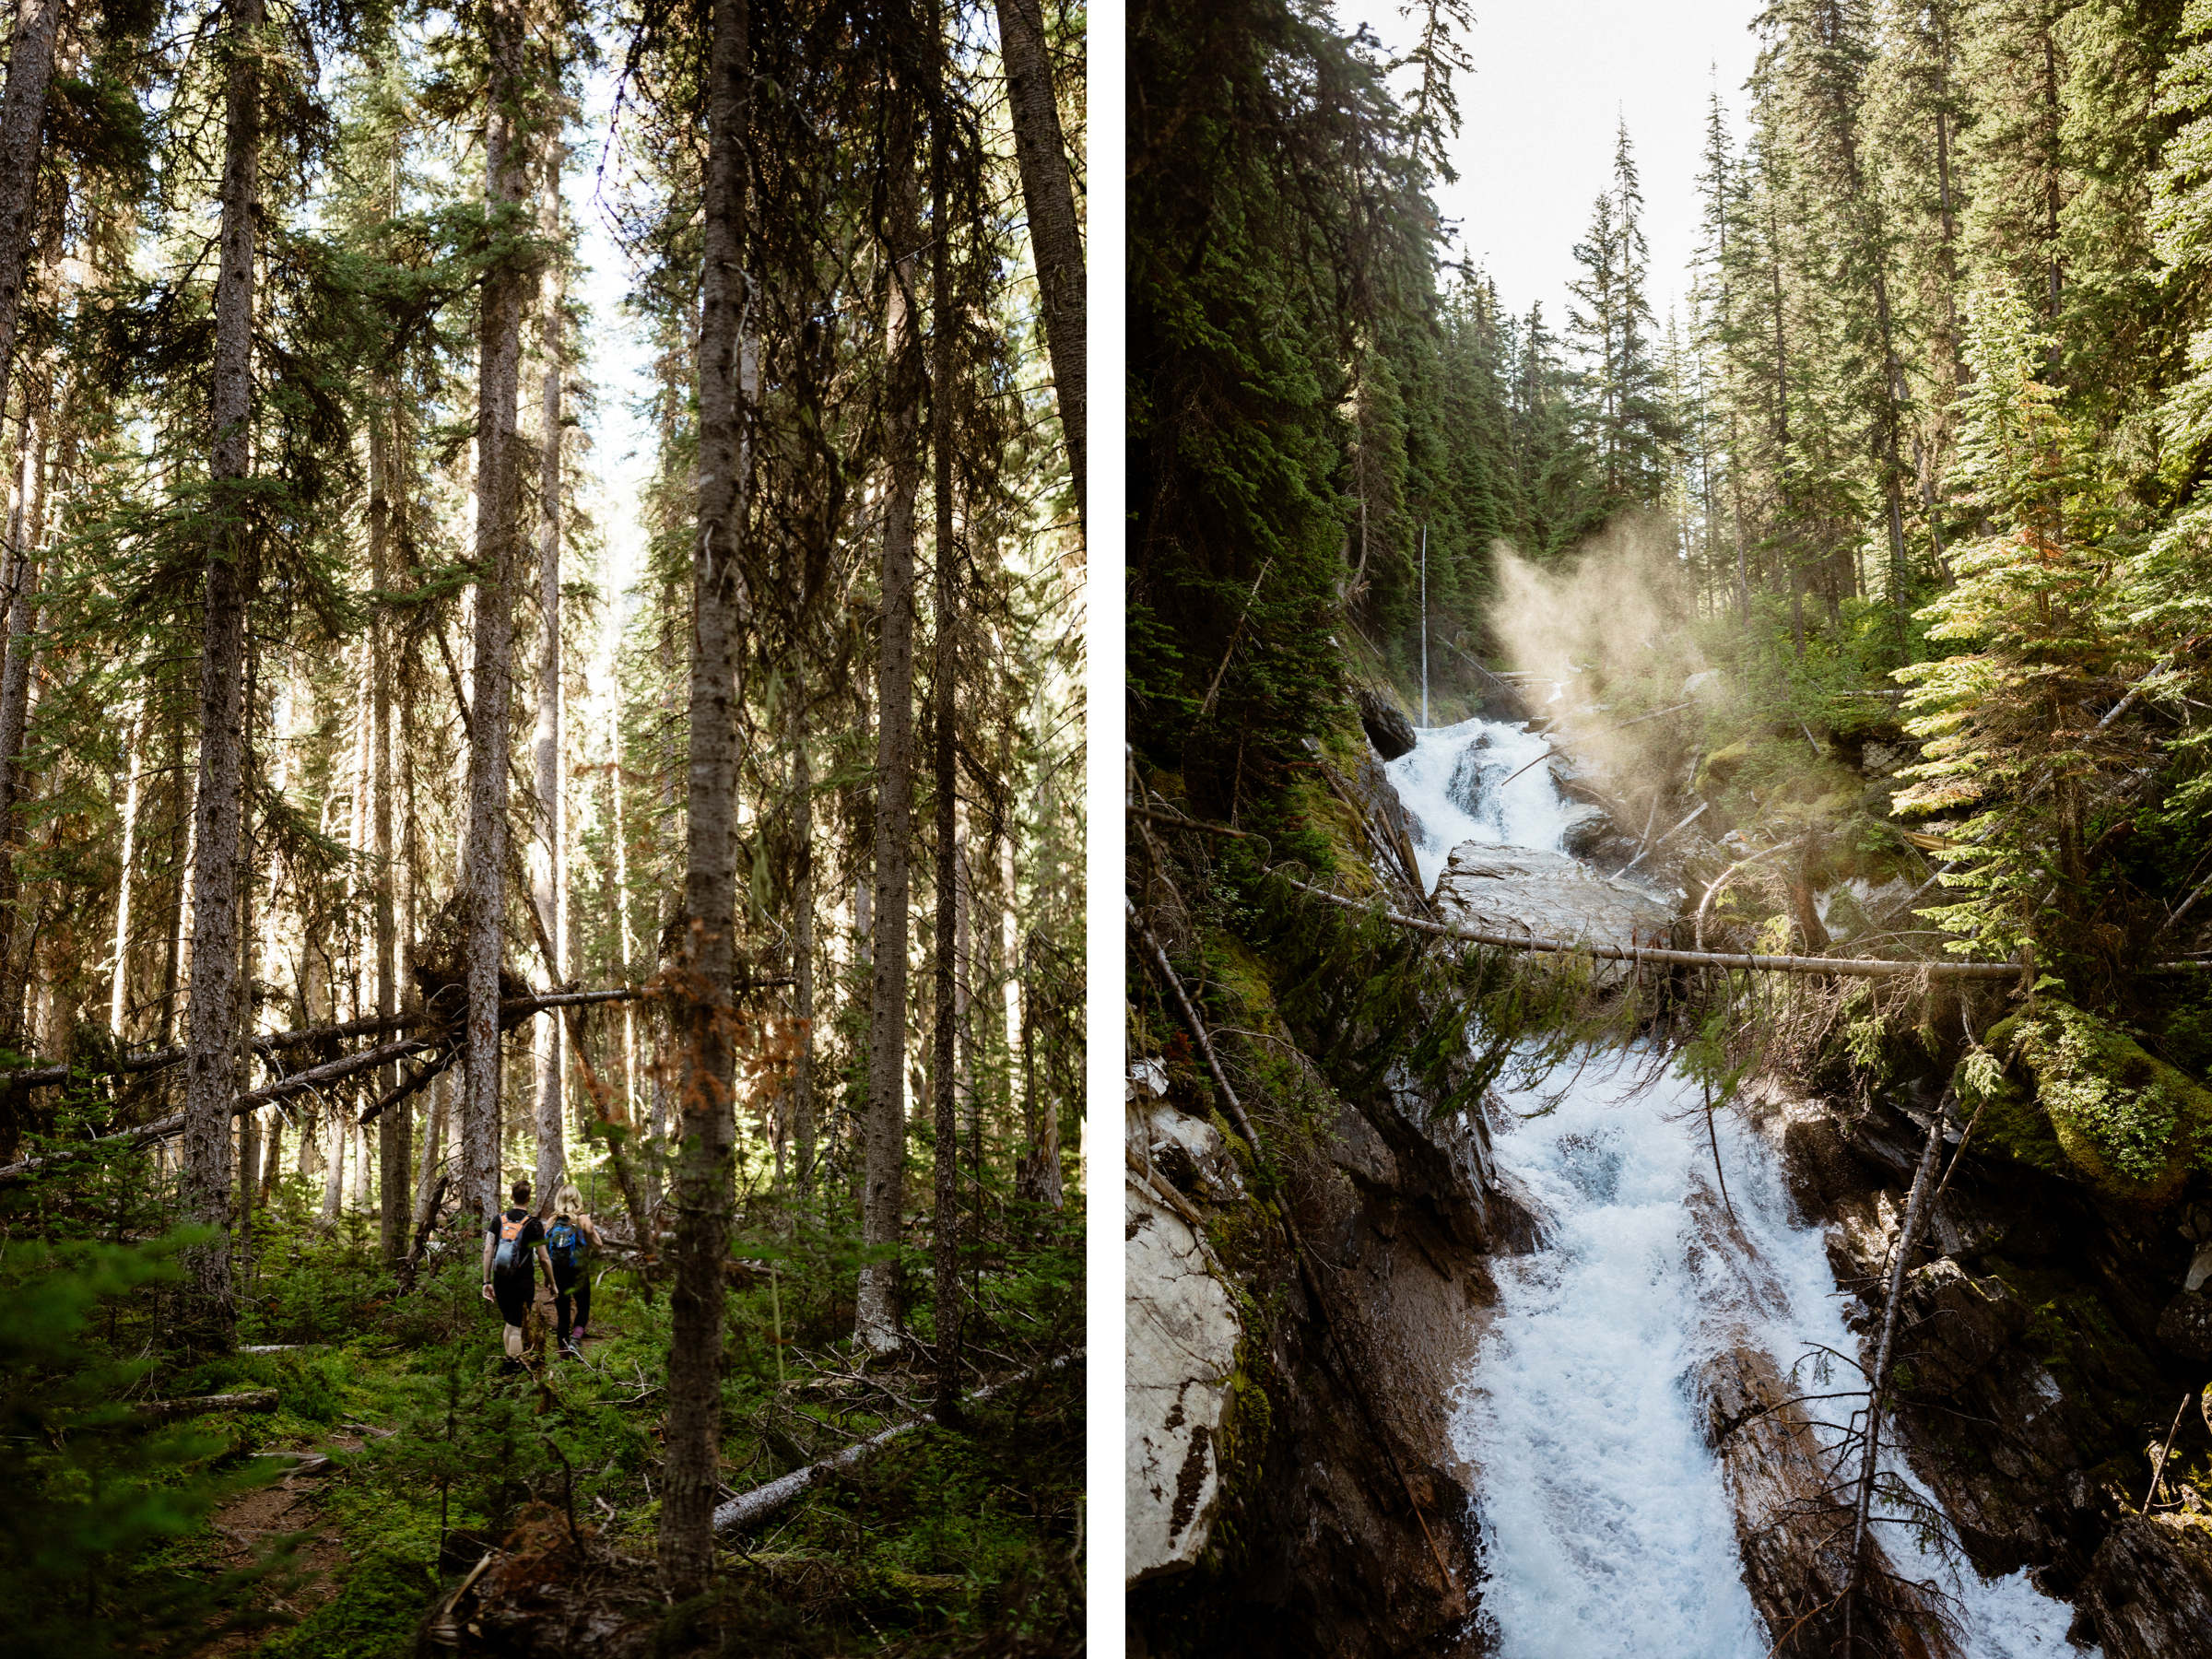 Adventure Elopement Photographers at a Hiking Wedding near Invermere - Photo 4